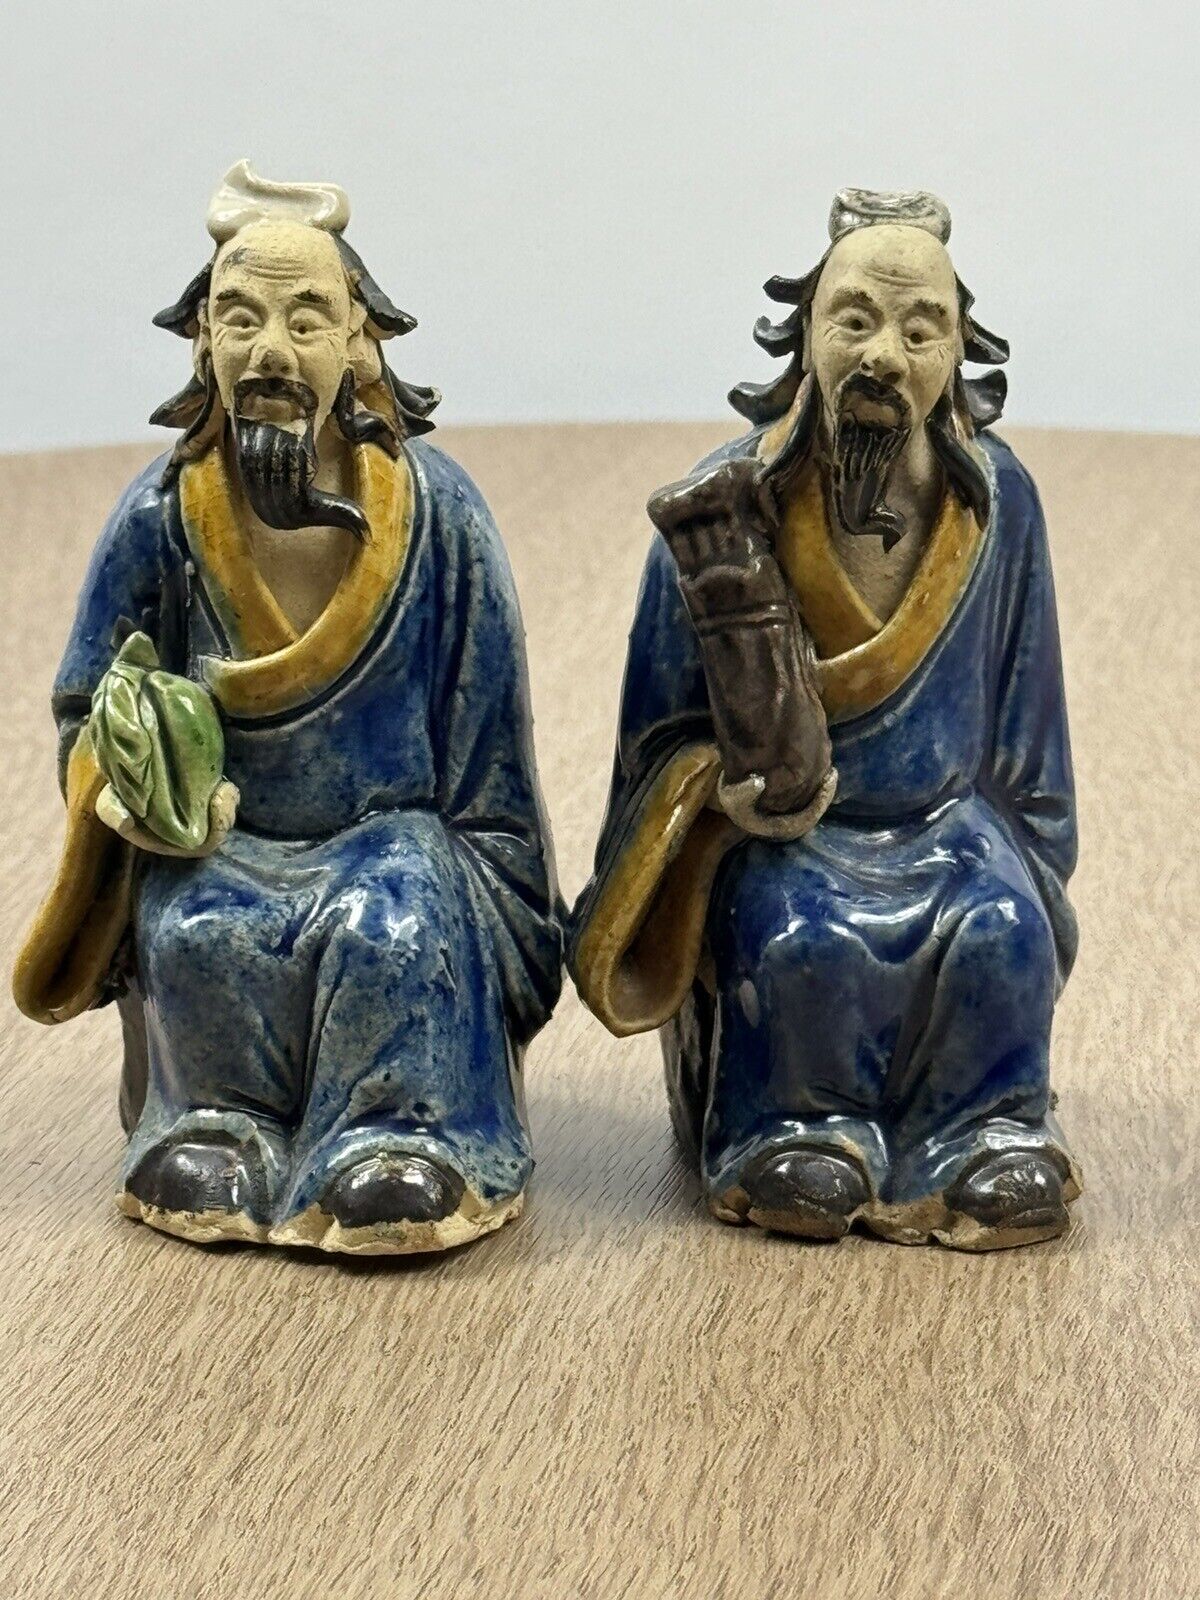 Vintage Chinese Mud Men Figurines, Two Wearing Blue Robes, Excellent Condition